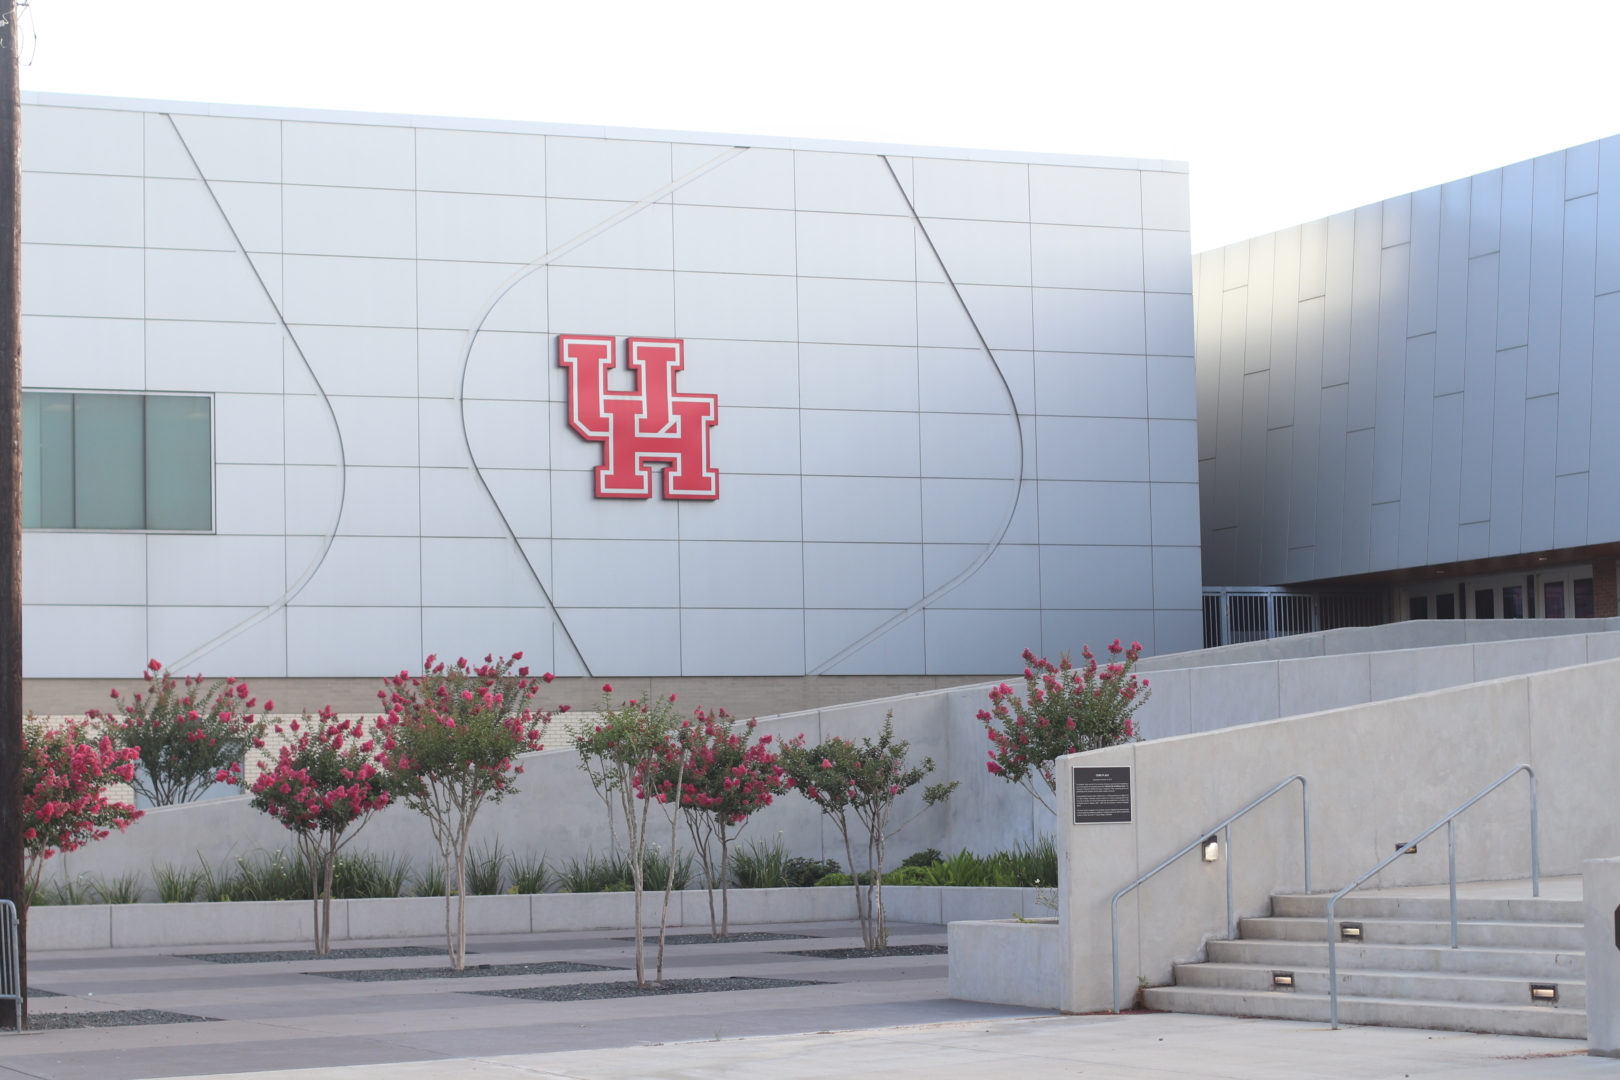 The Guy V. Lewis Development Center, home of UH's men's and women's basketball teams, is one of the facilities that will be upgraded with money raised through HOUSTON RISE. | James Mueller/The Cougar